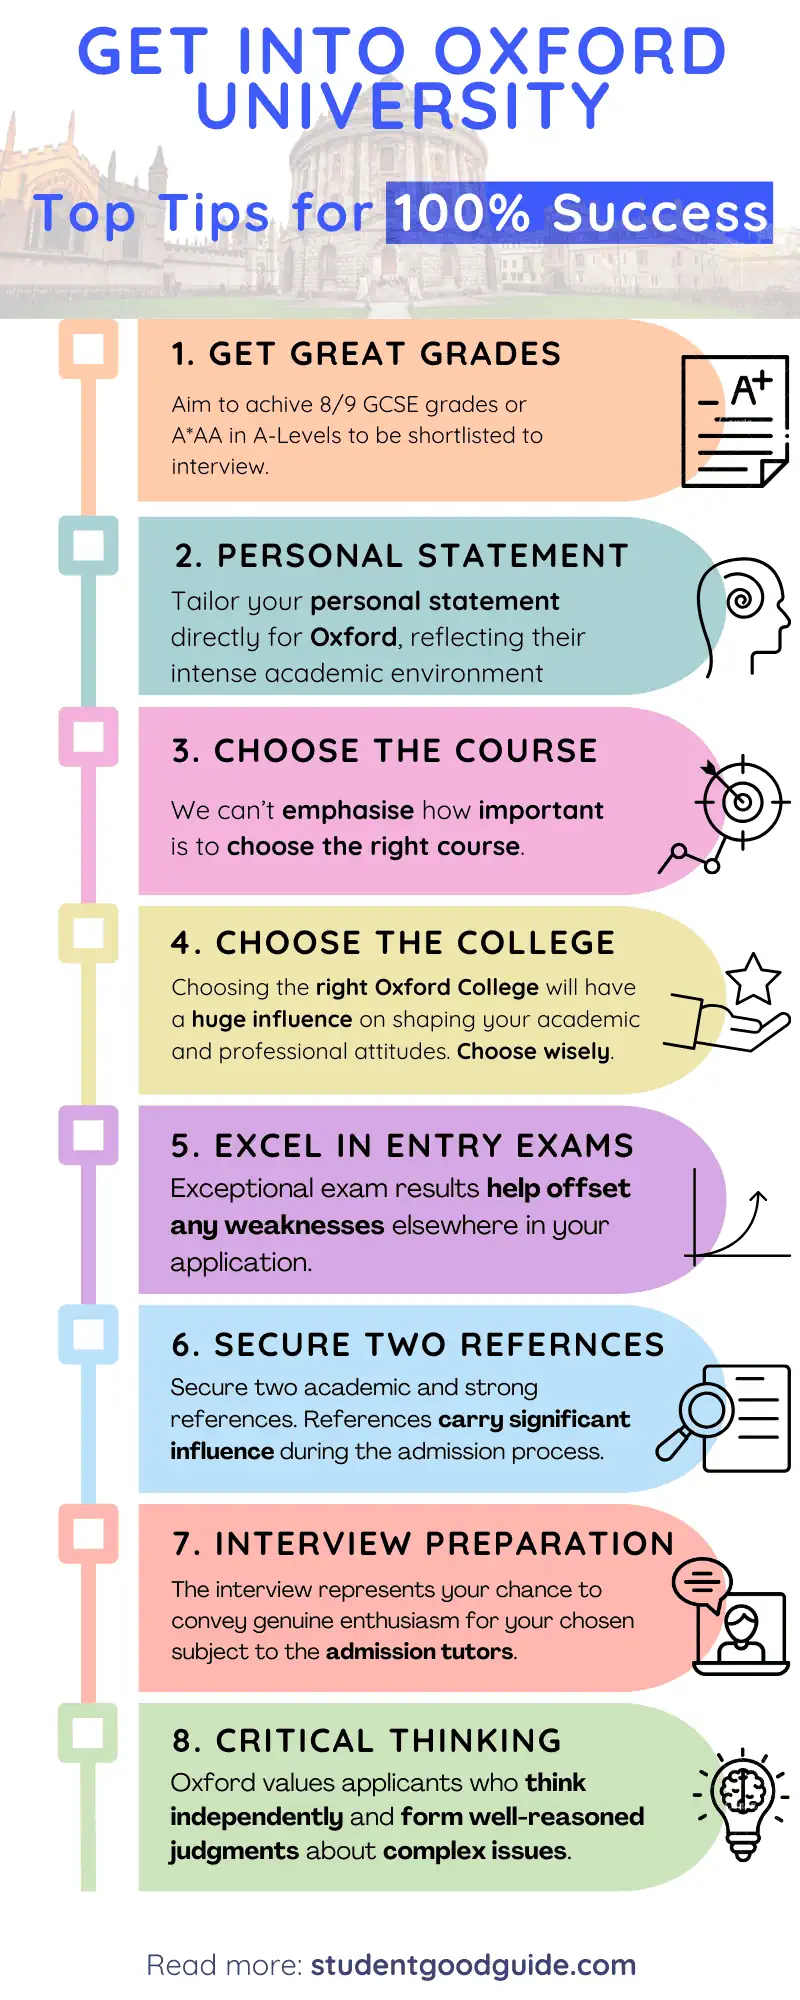 Top tips on how to get into the University of Oxford